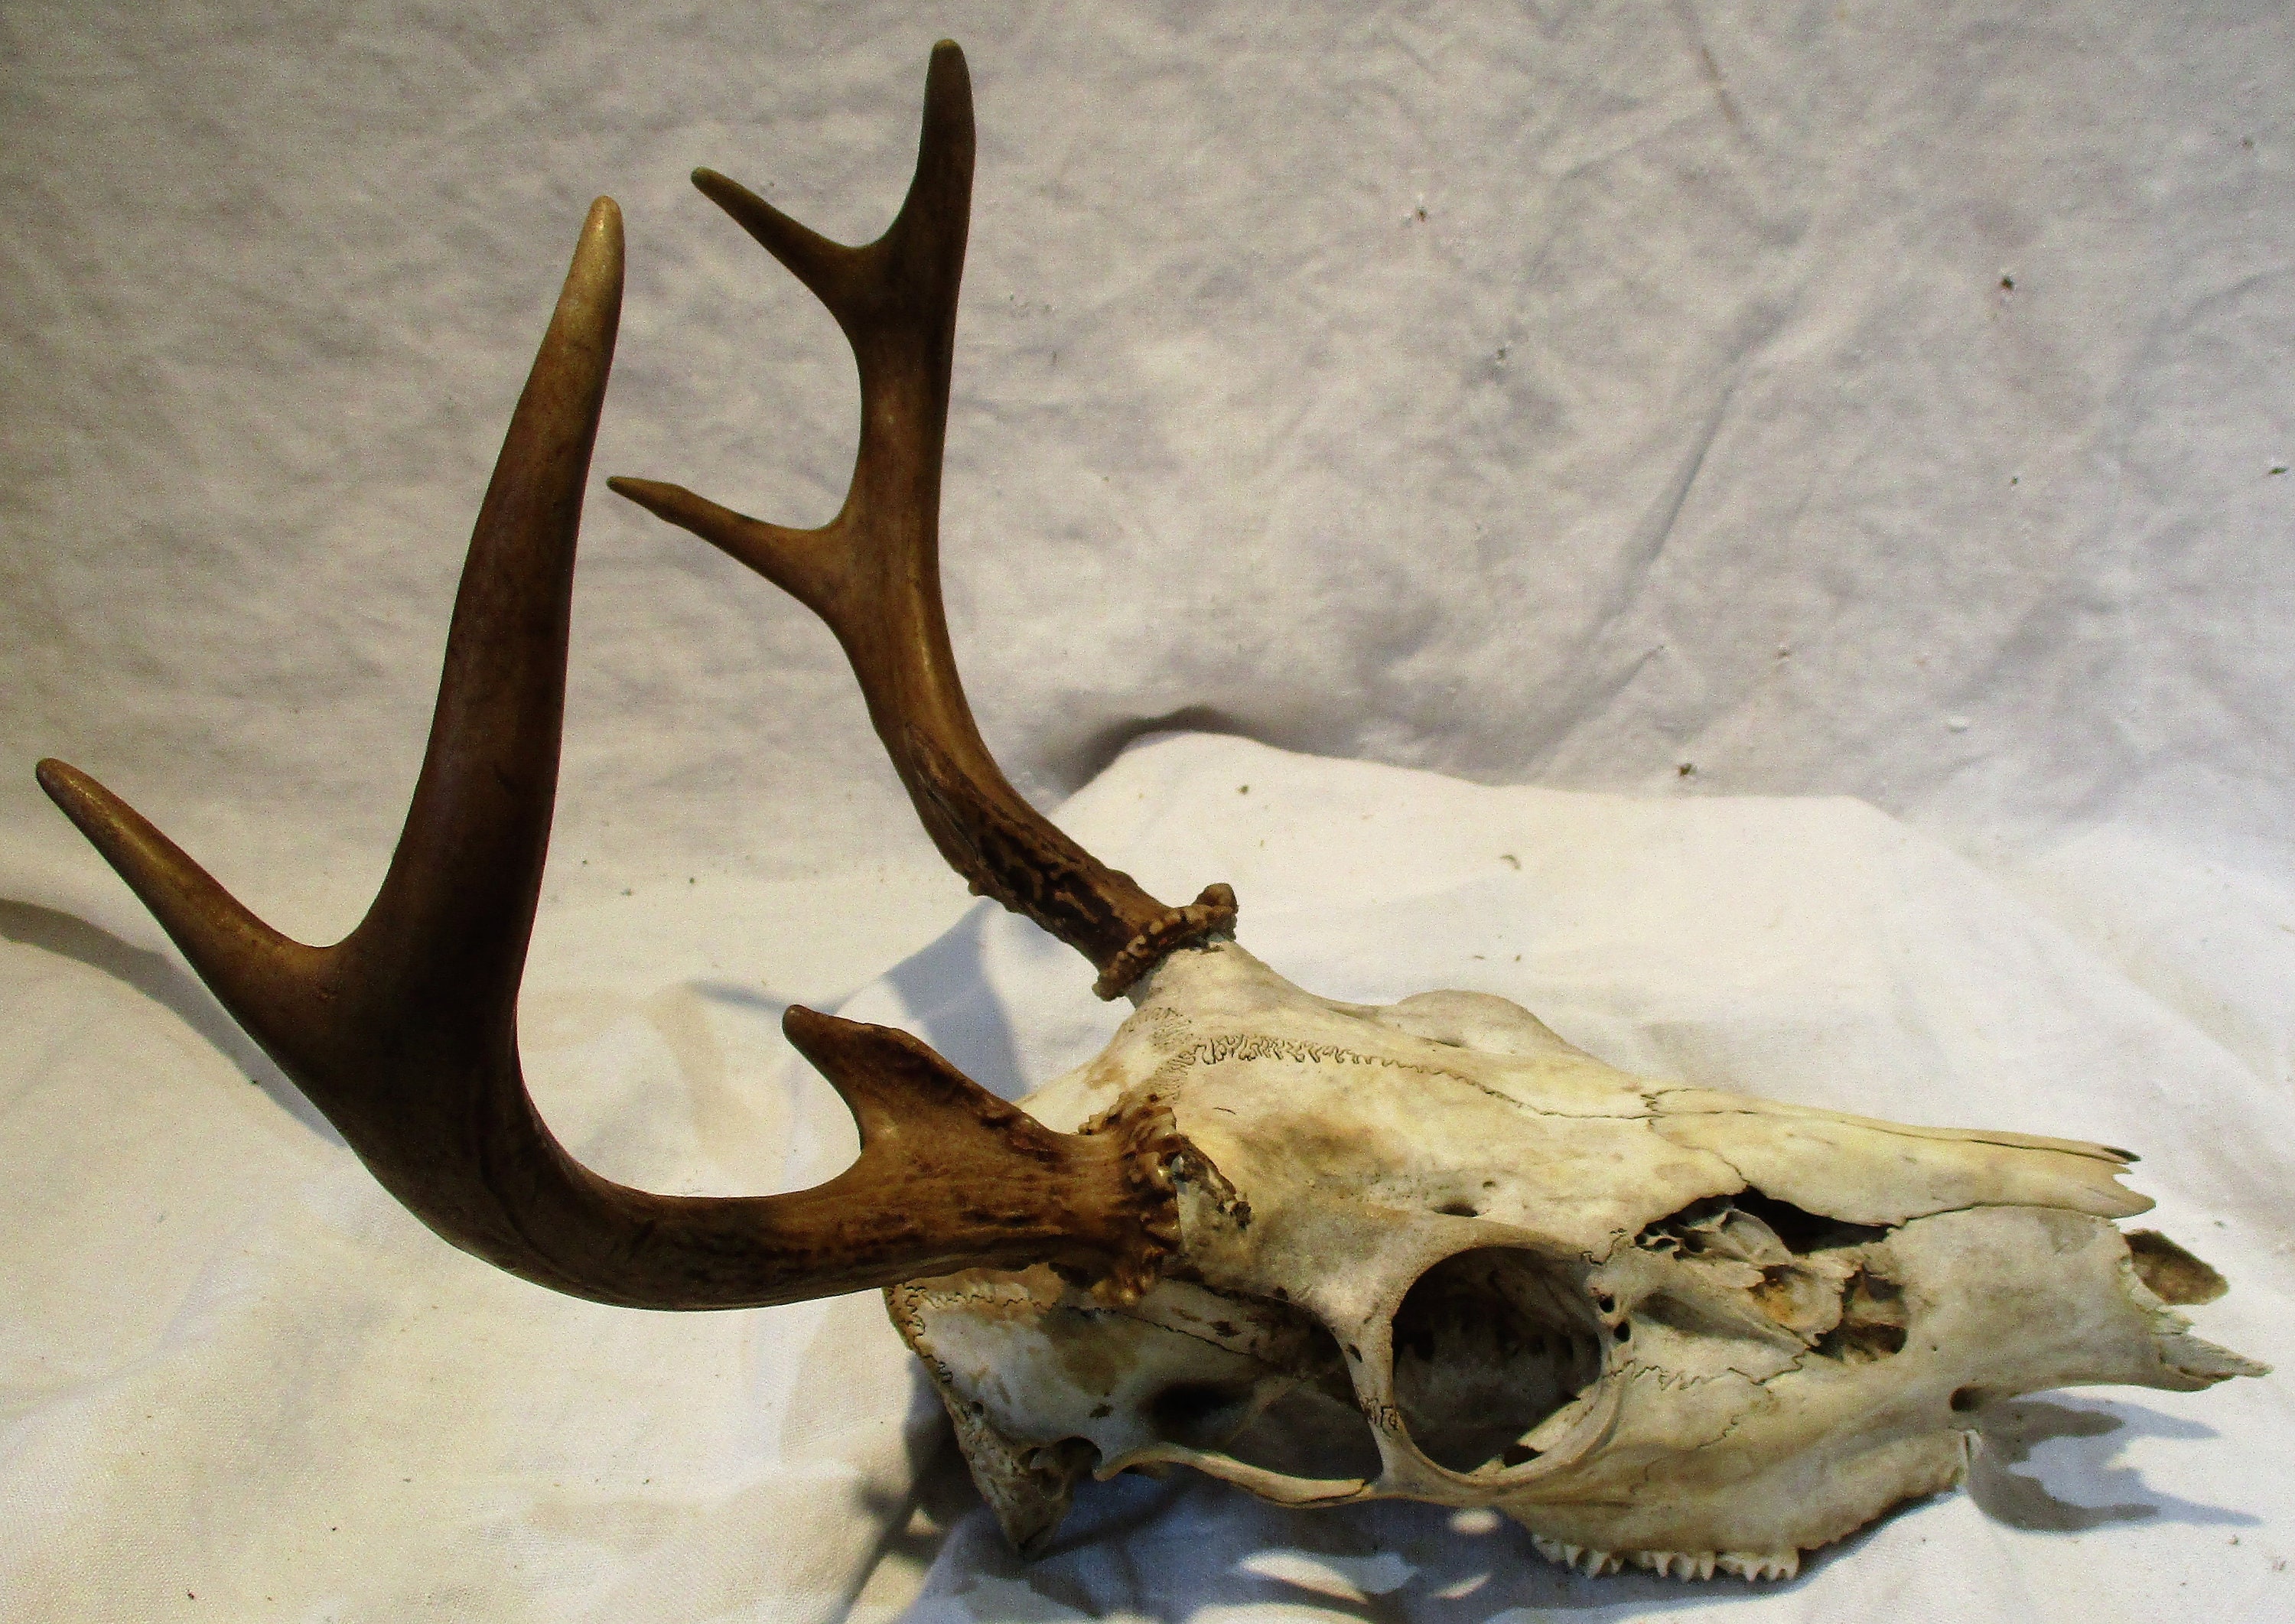 Excellent 7-Point Whitetail Buck Deer Skull & Antlers Taxidermy Mount -  SafariWorks Decor